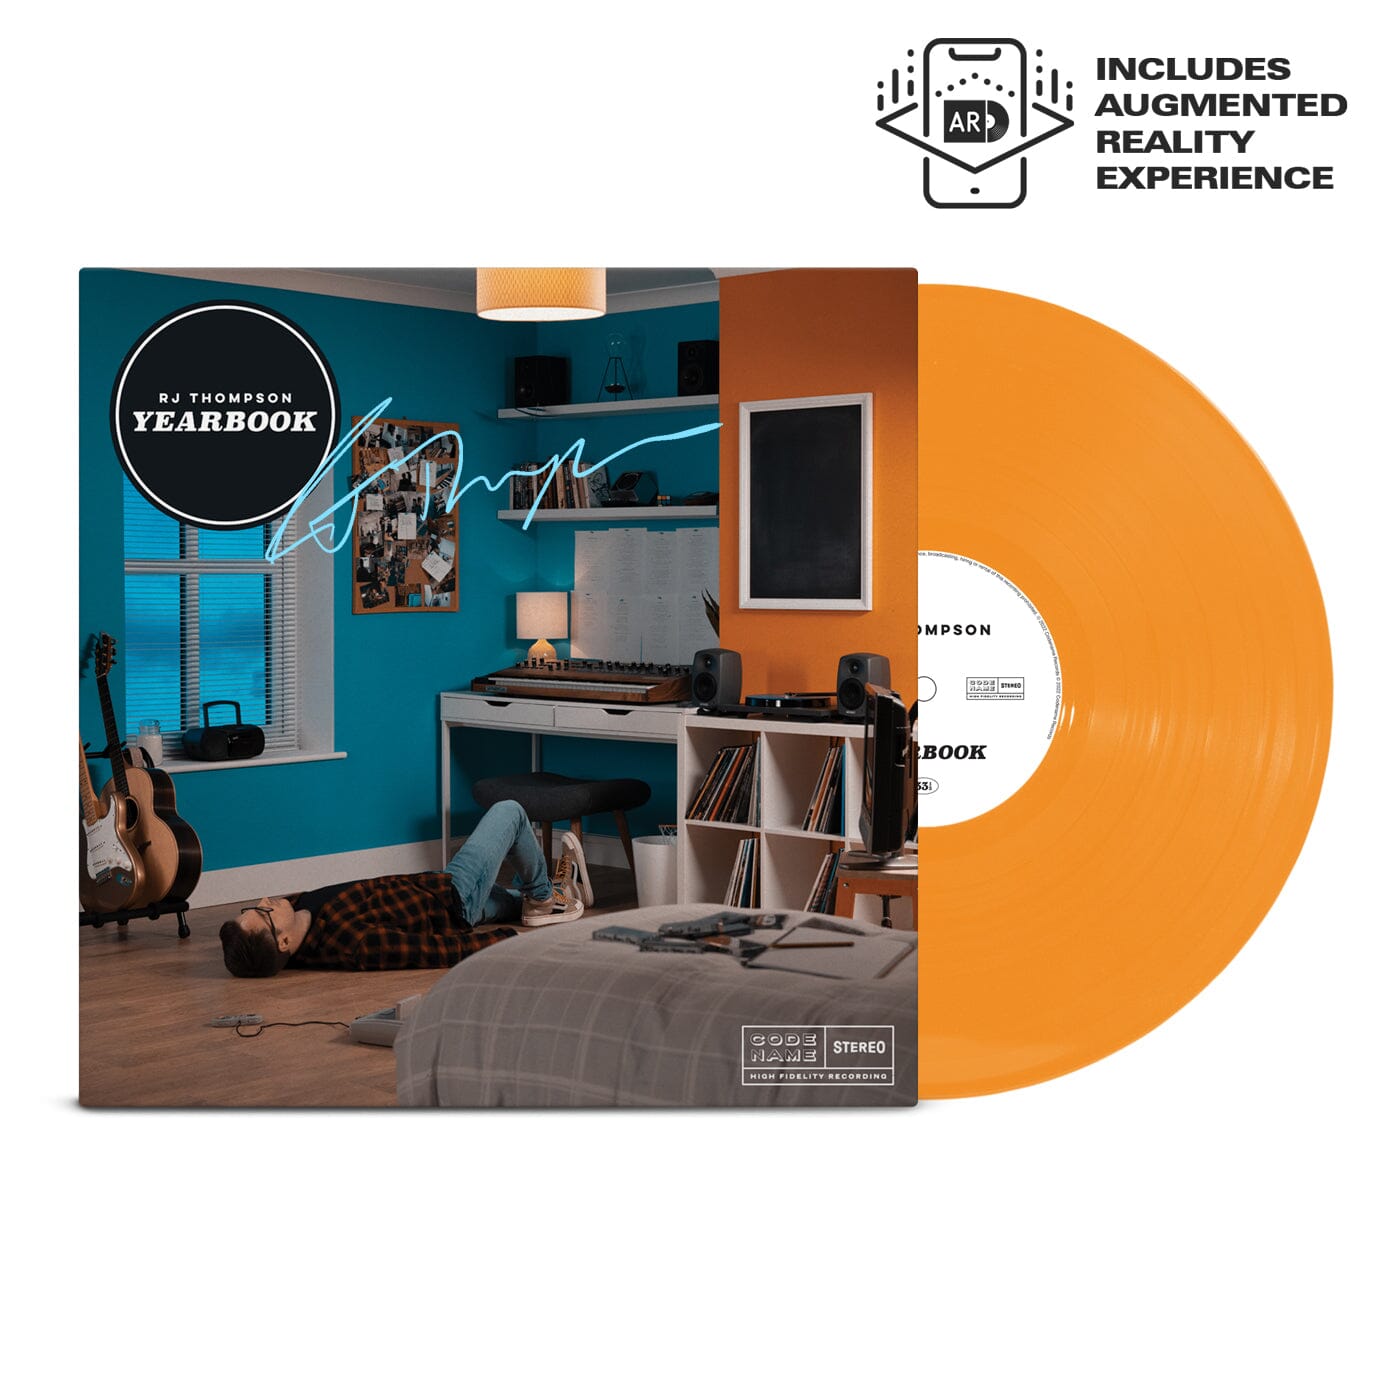 Yearbook - Limited Edition 12" Vinyl | RJ Thompson | Official Website & Store